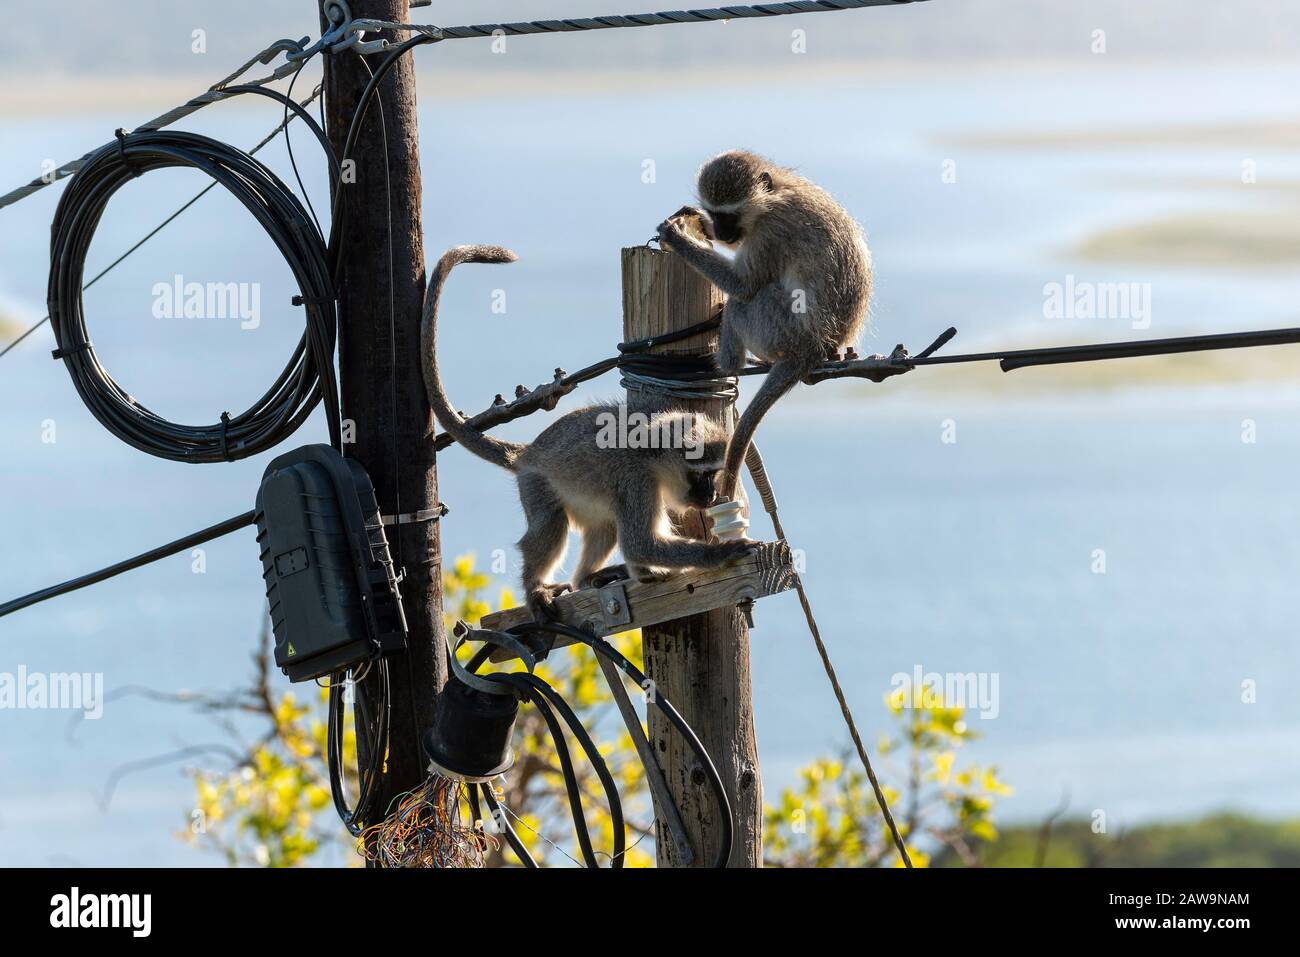 Hermanus, Western Cape, South Africa. Dec 2019.  Two Vervet monkeys eating  and playing near an electricity junction box on a telegraph pole on top of Stock Photo